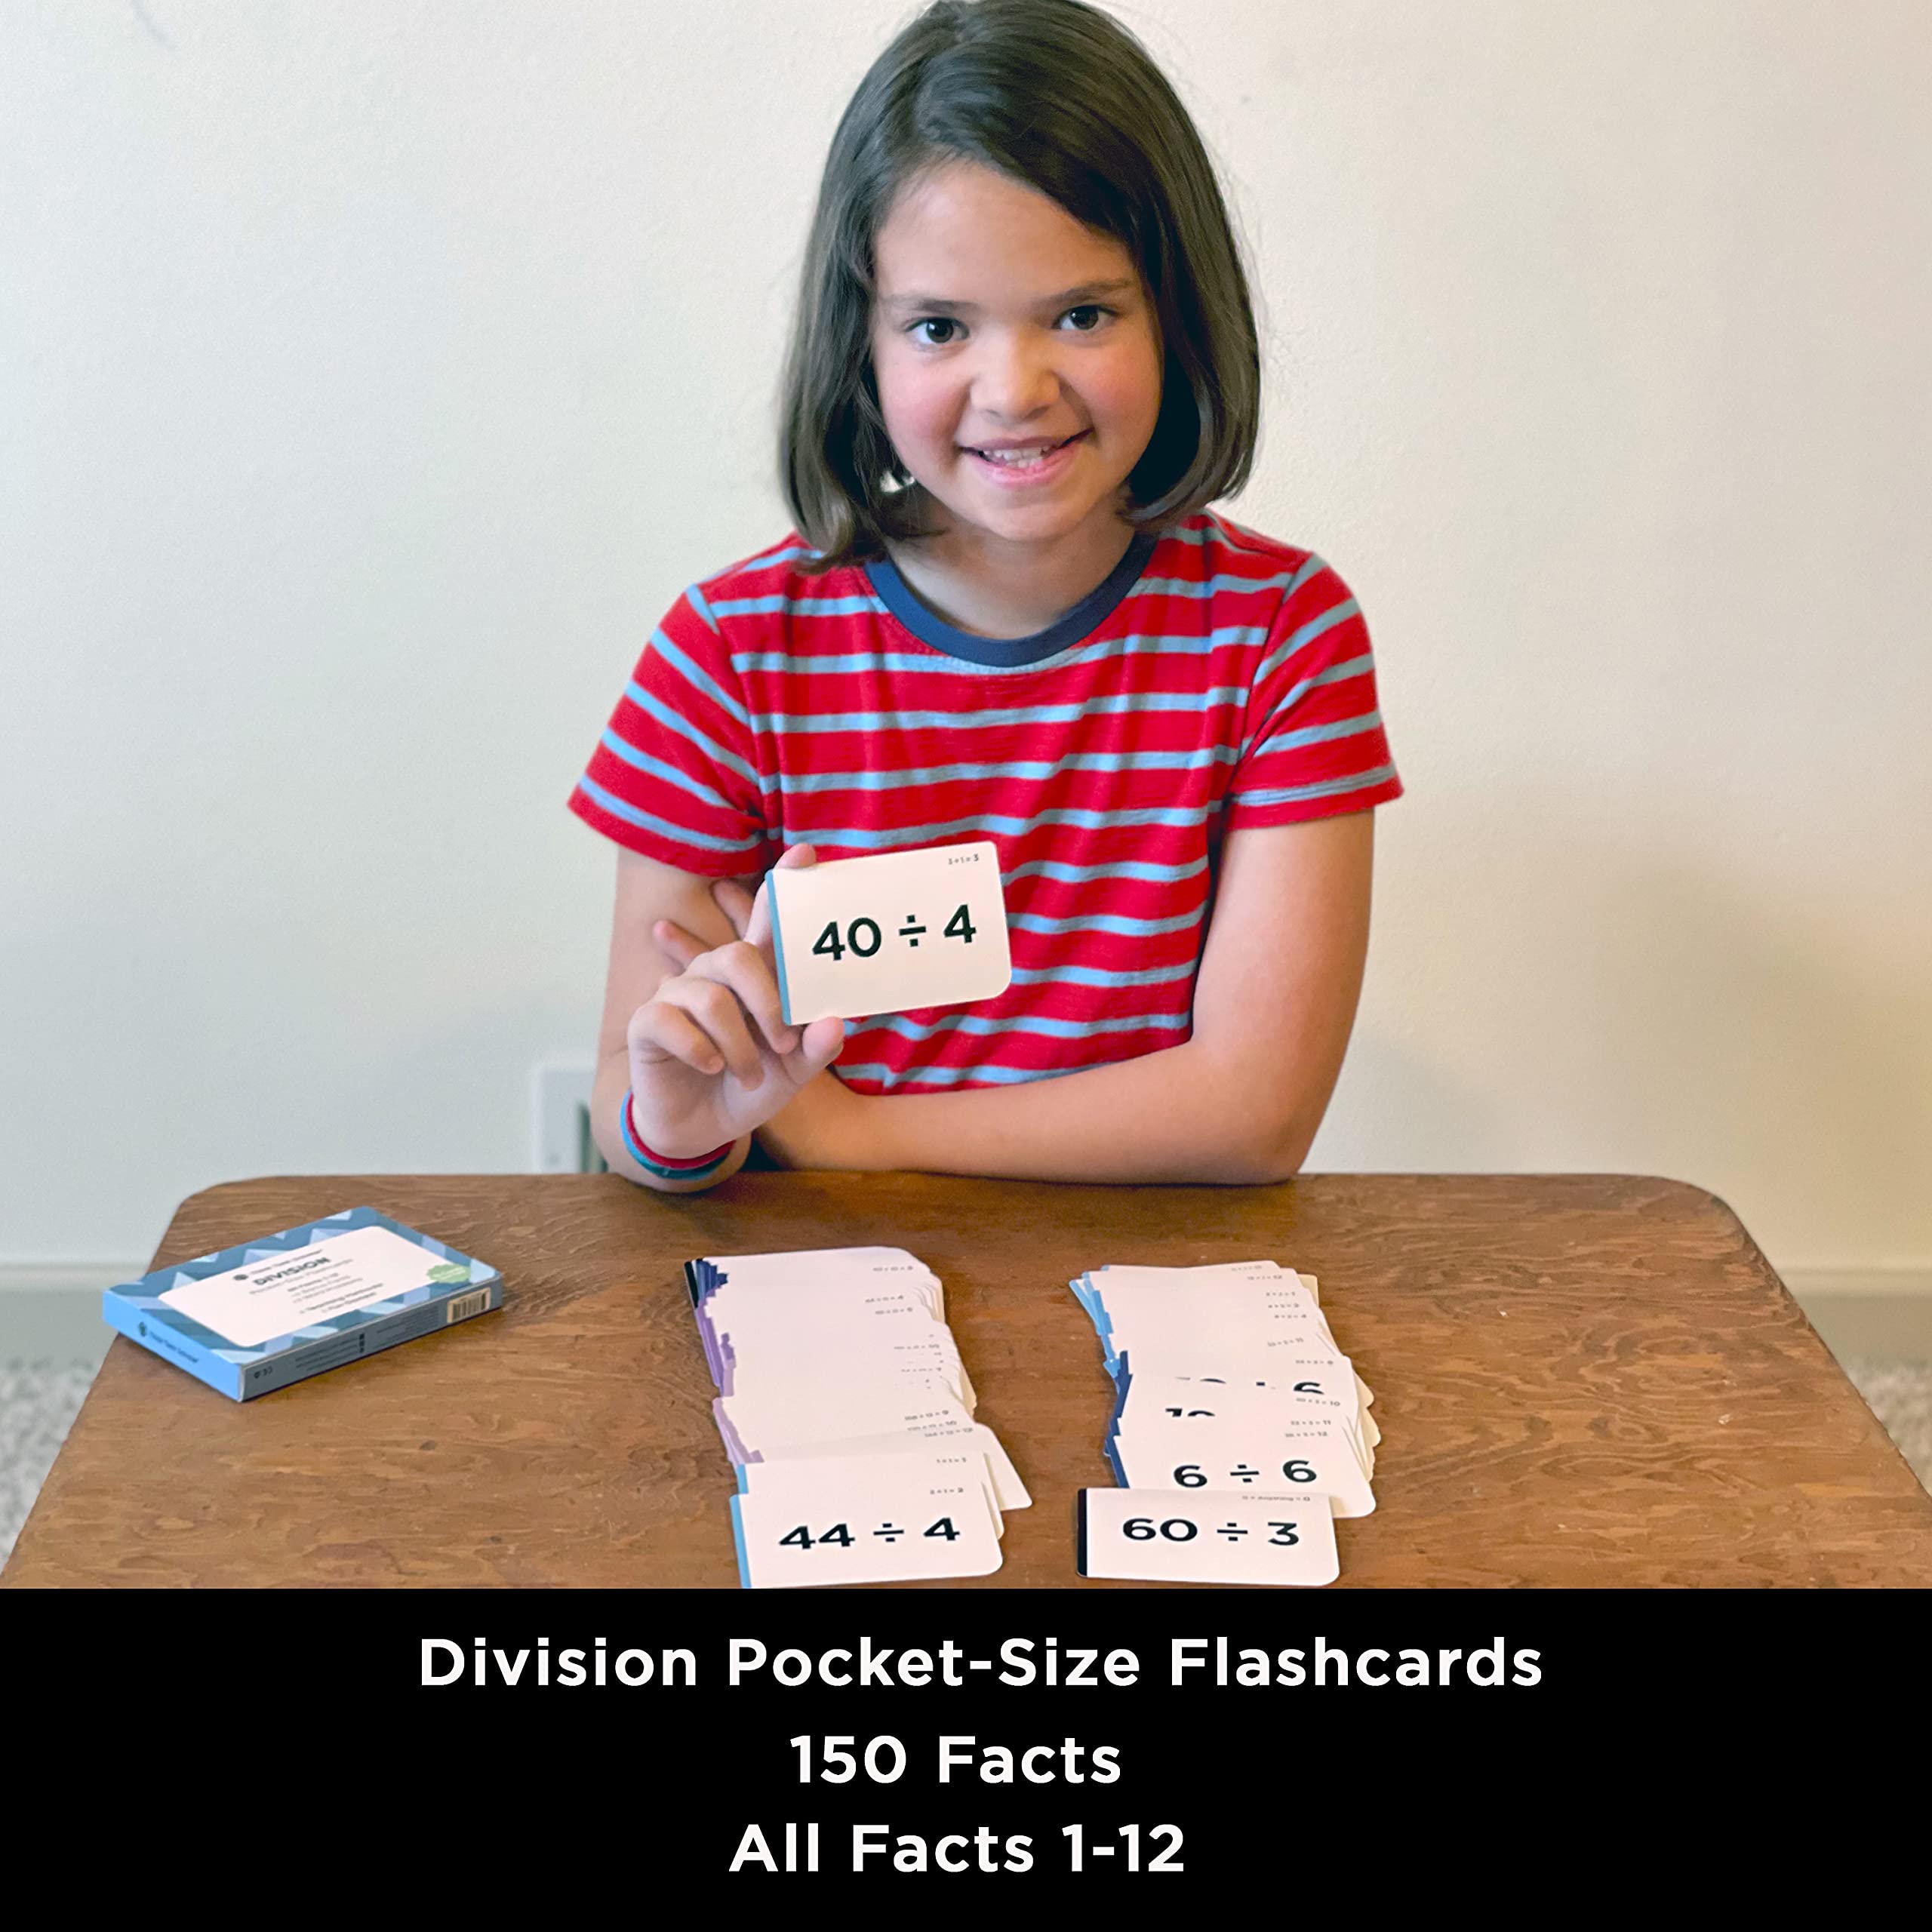 Think Tank Scholar Division Flash Cards - 300 Facts 1-12 - (Award Winning) Flashcards for Kids in 3rd, 4th, 5th, 6th Grade, Home